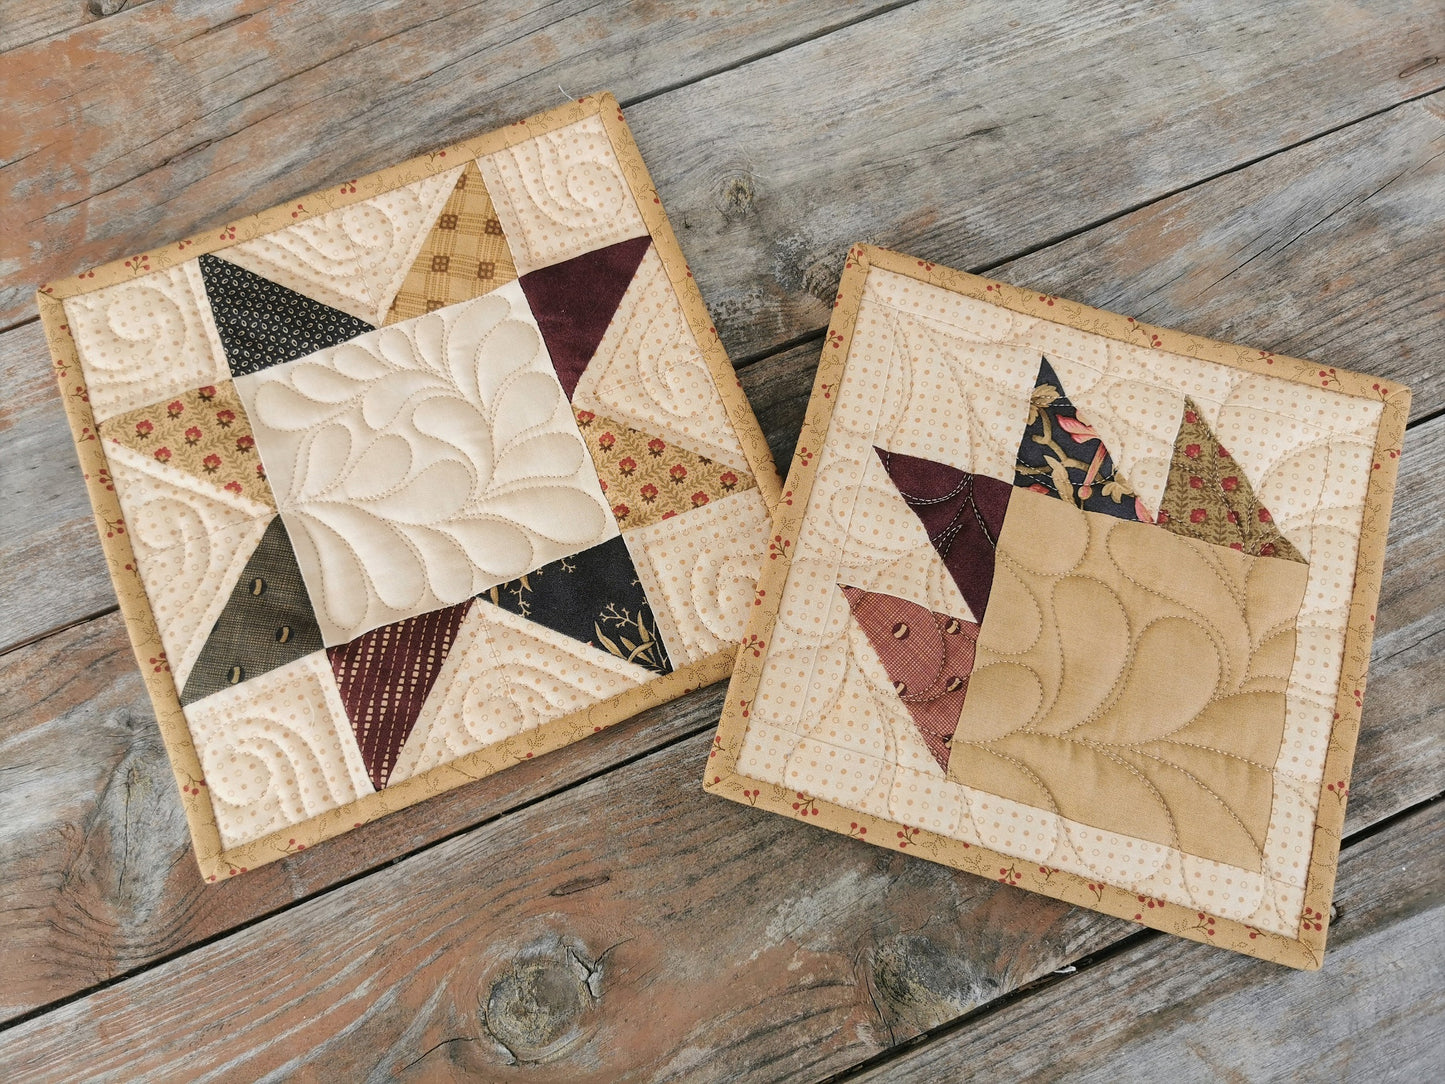 patchwork potholders shown side by side on wooden table